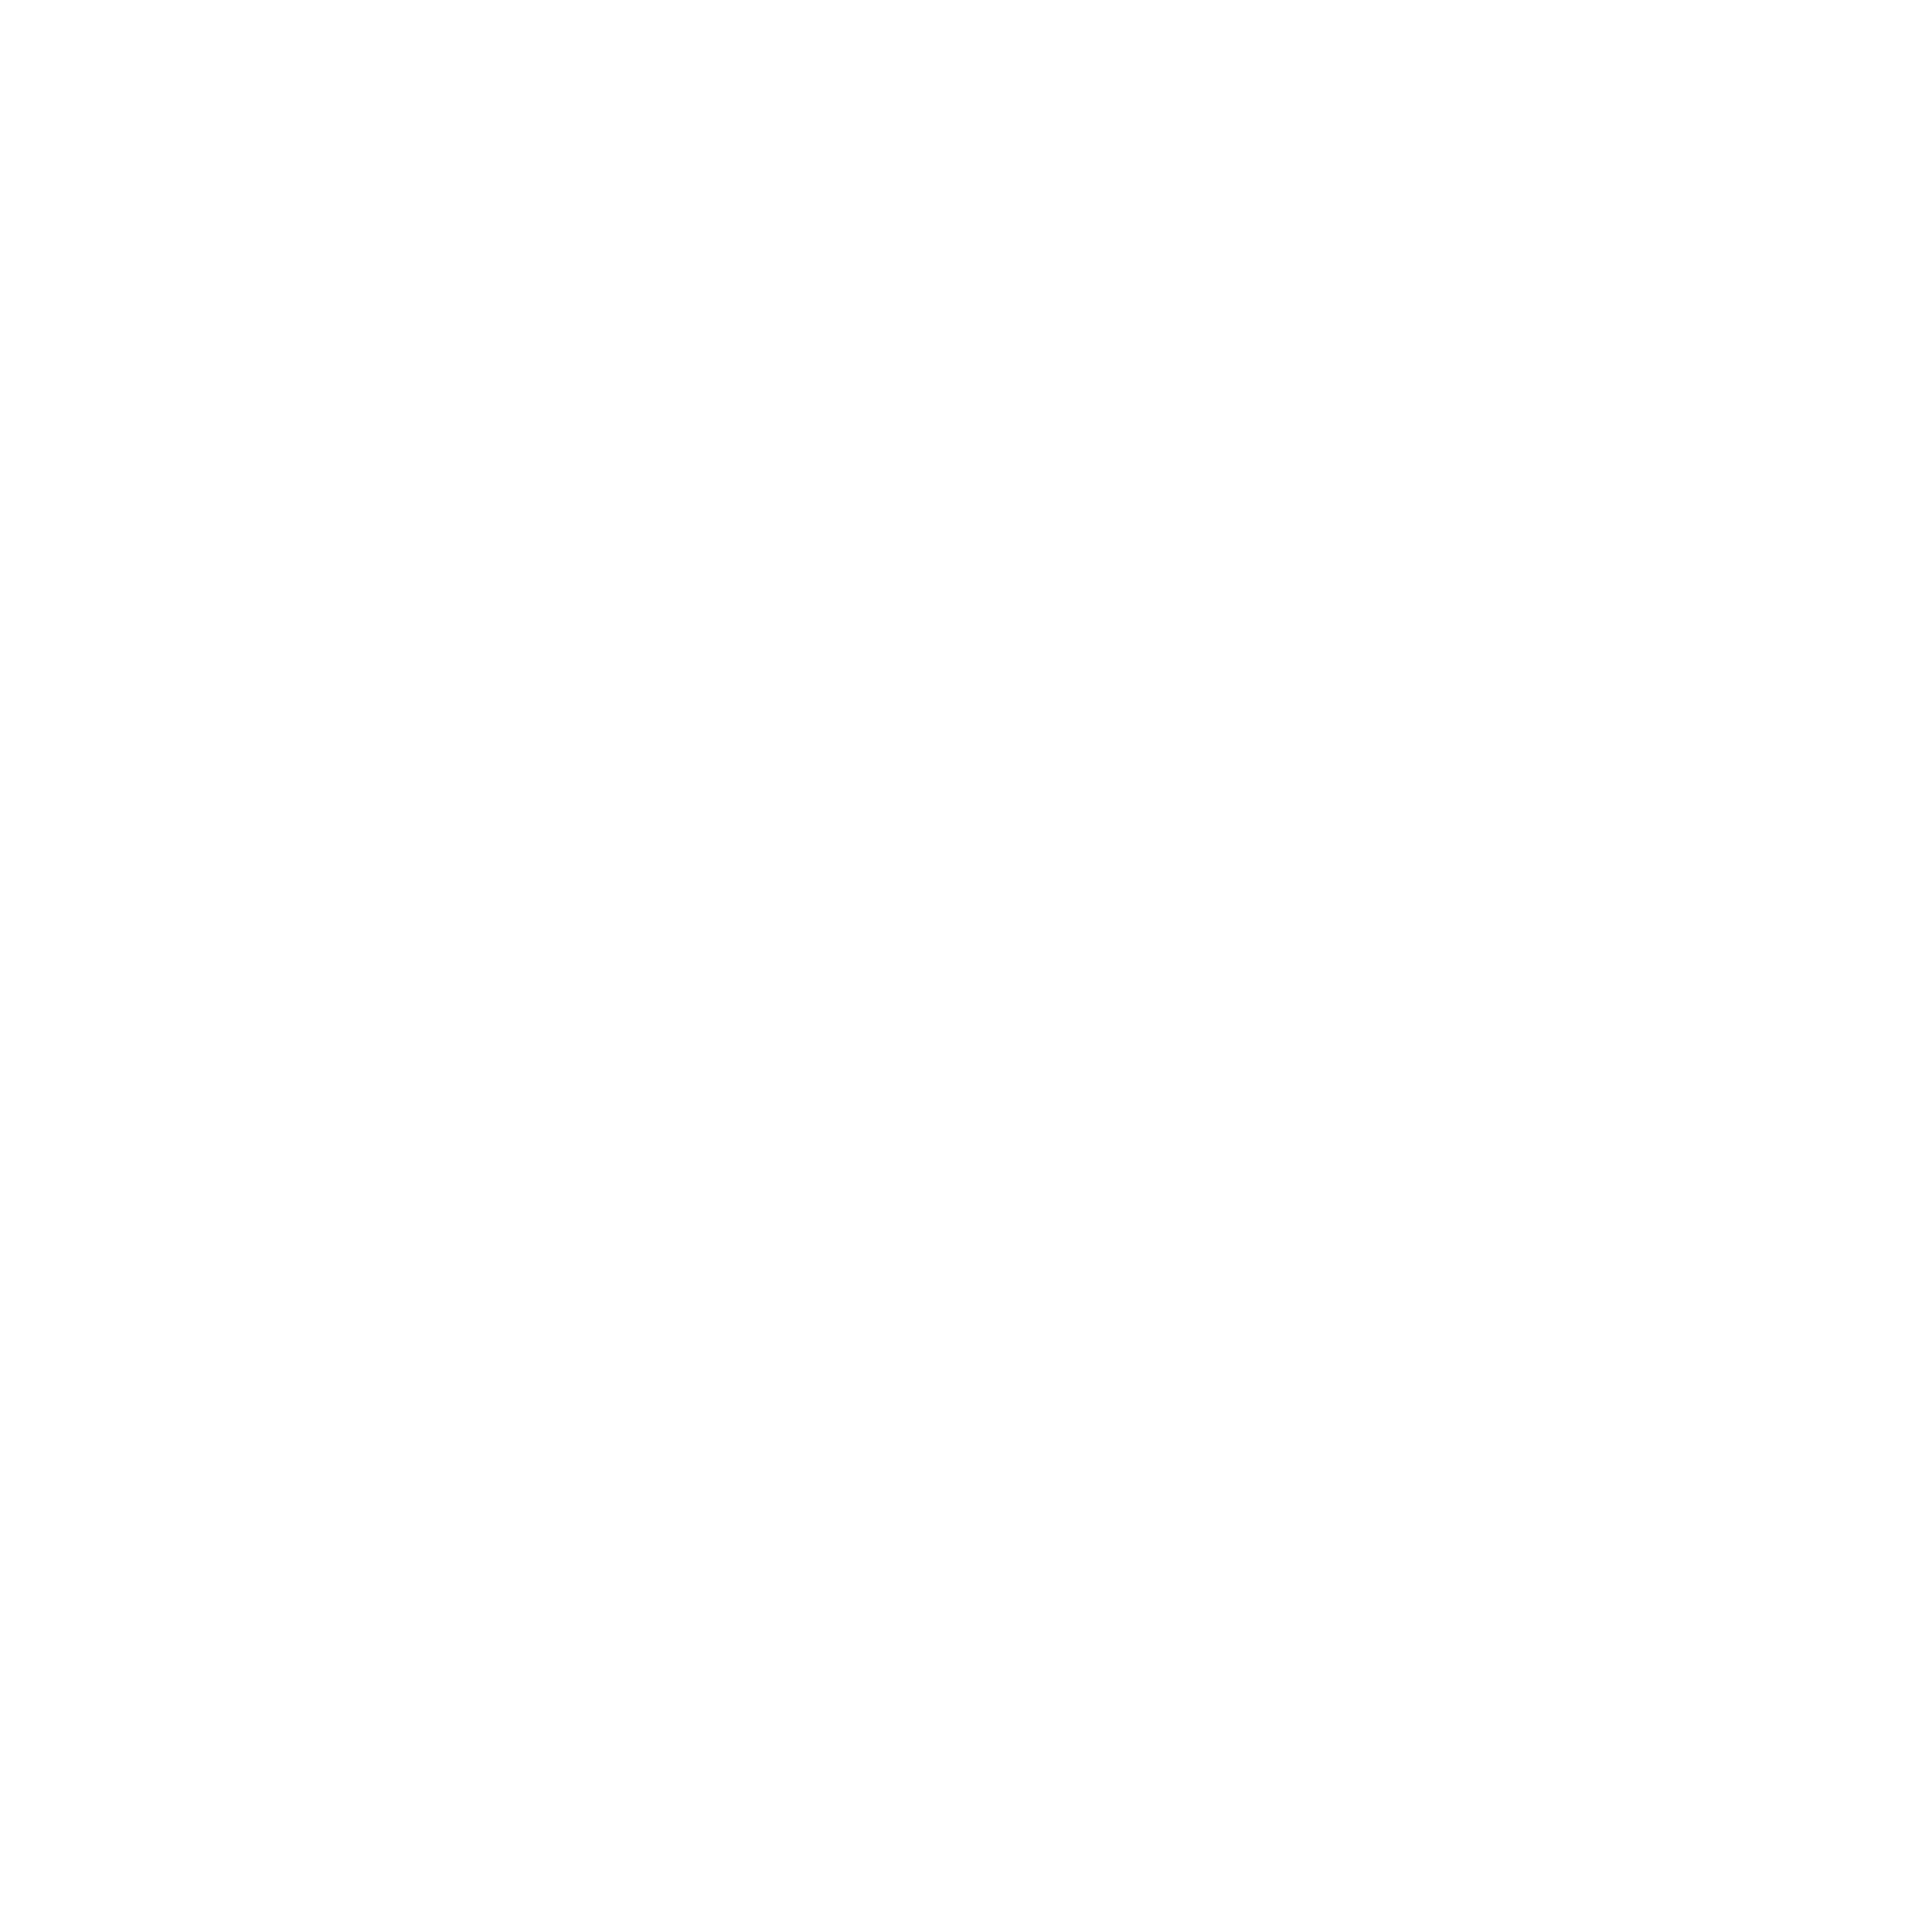 law clipart black and white